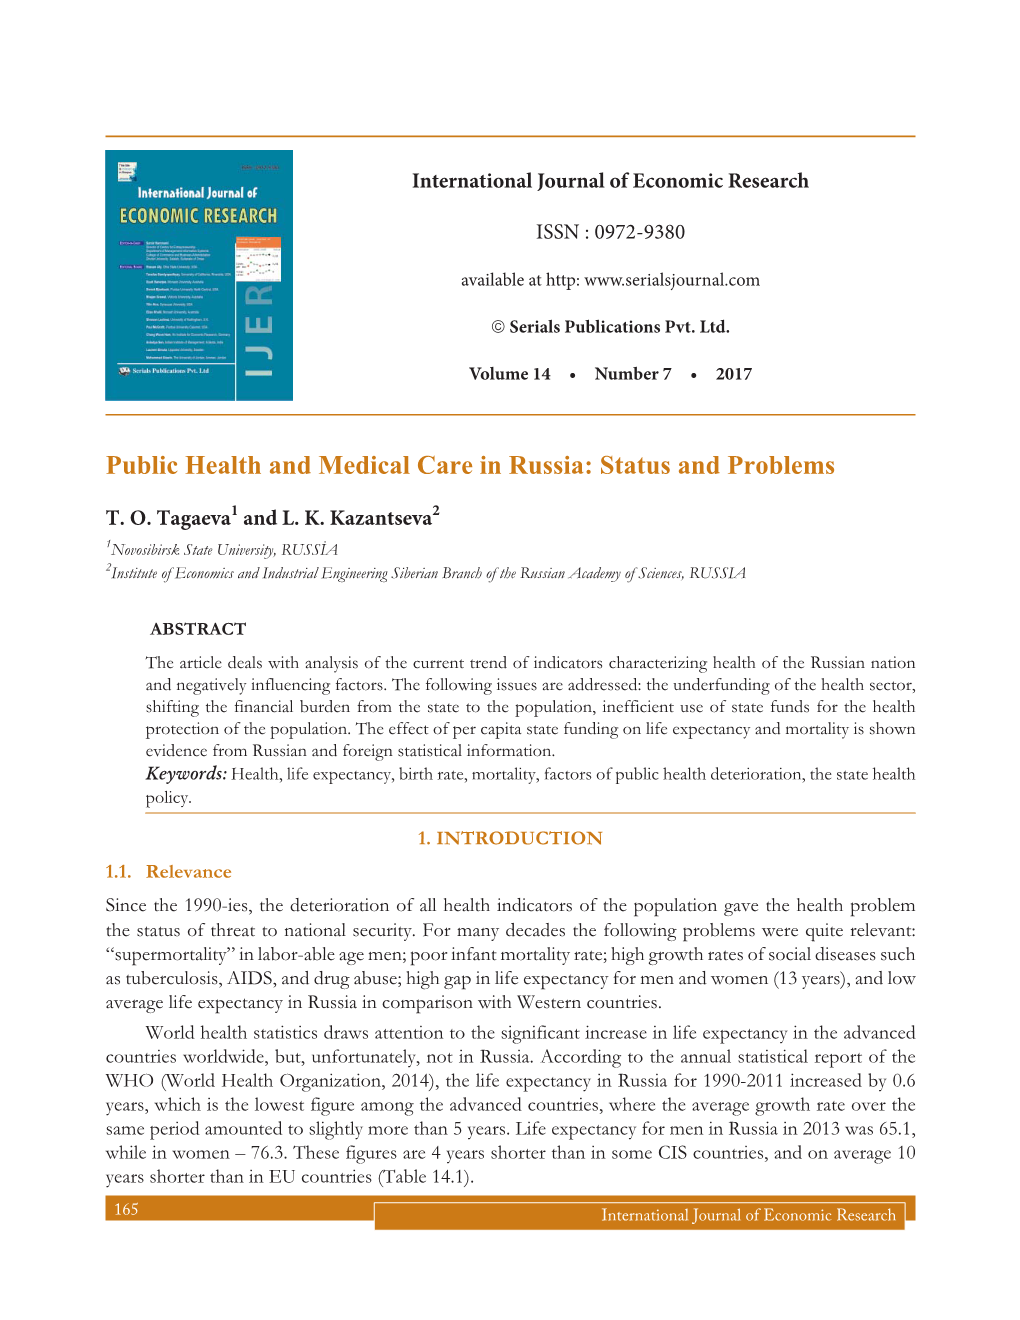 Public Health and Medical Care in Russia: Status and Problems